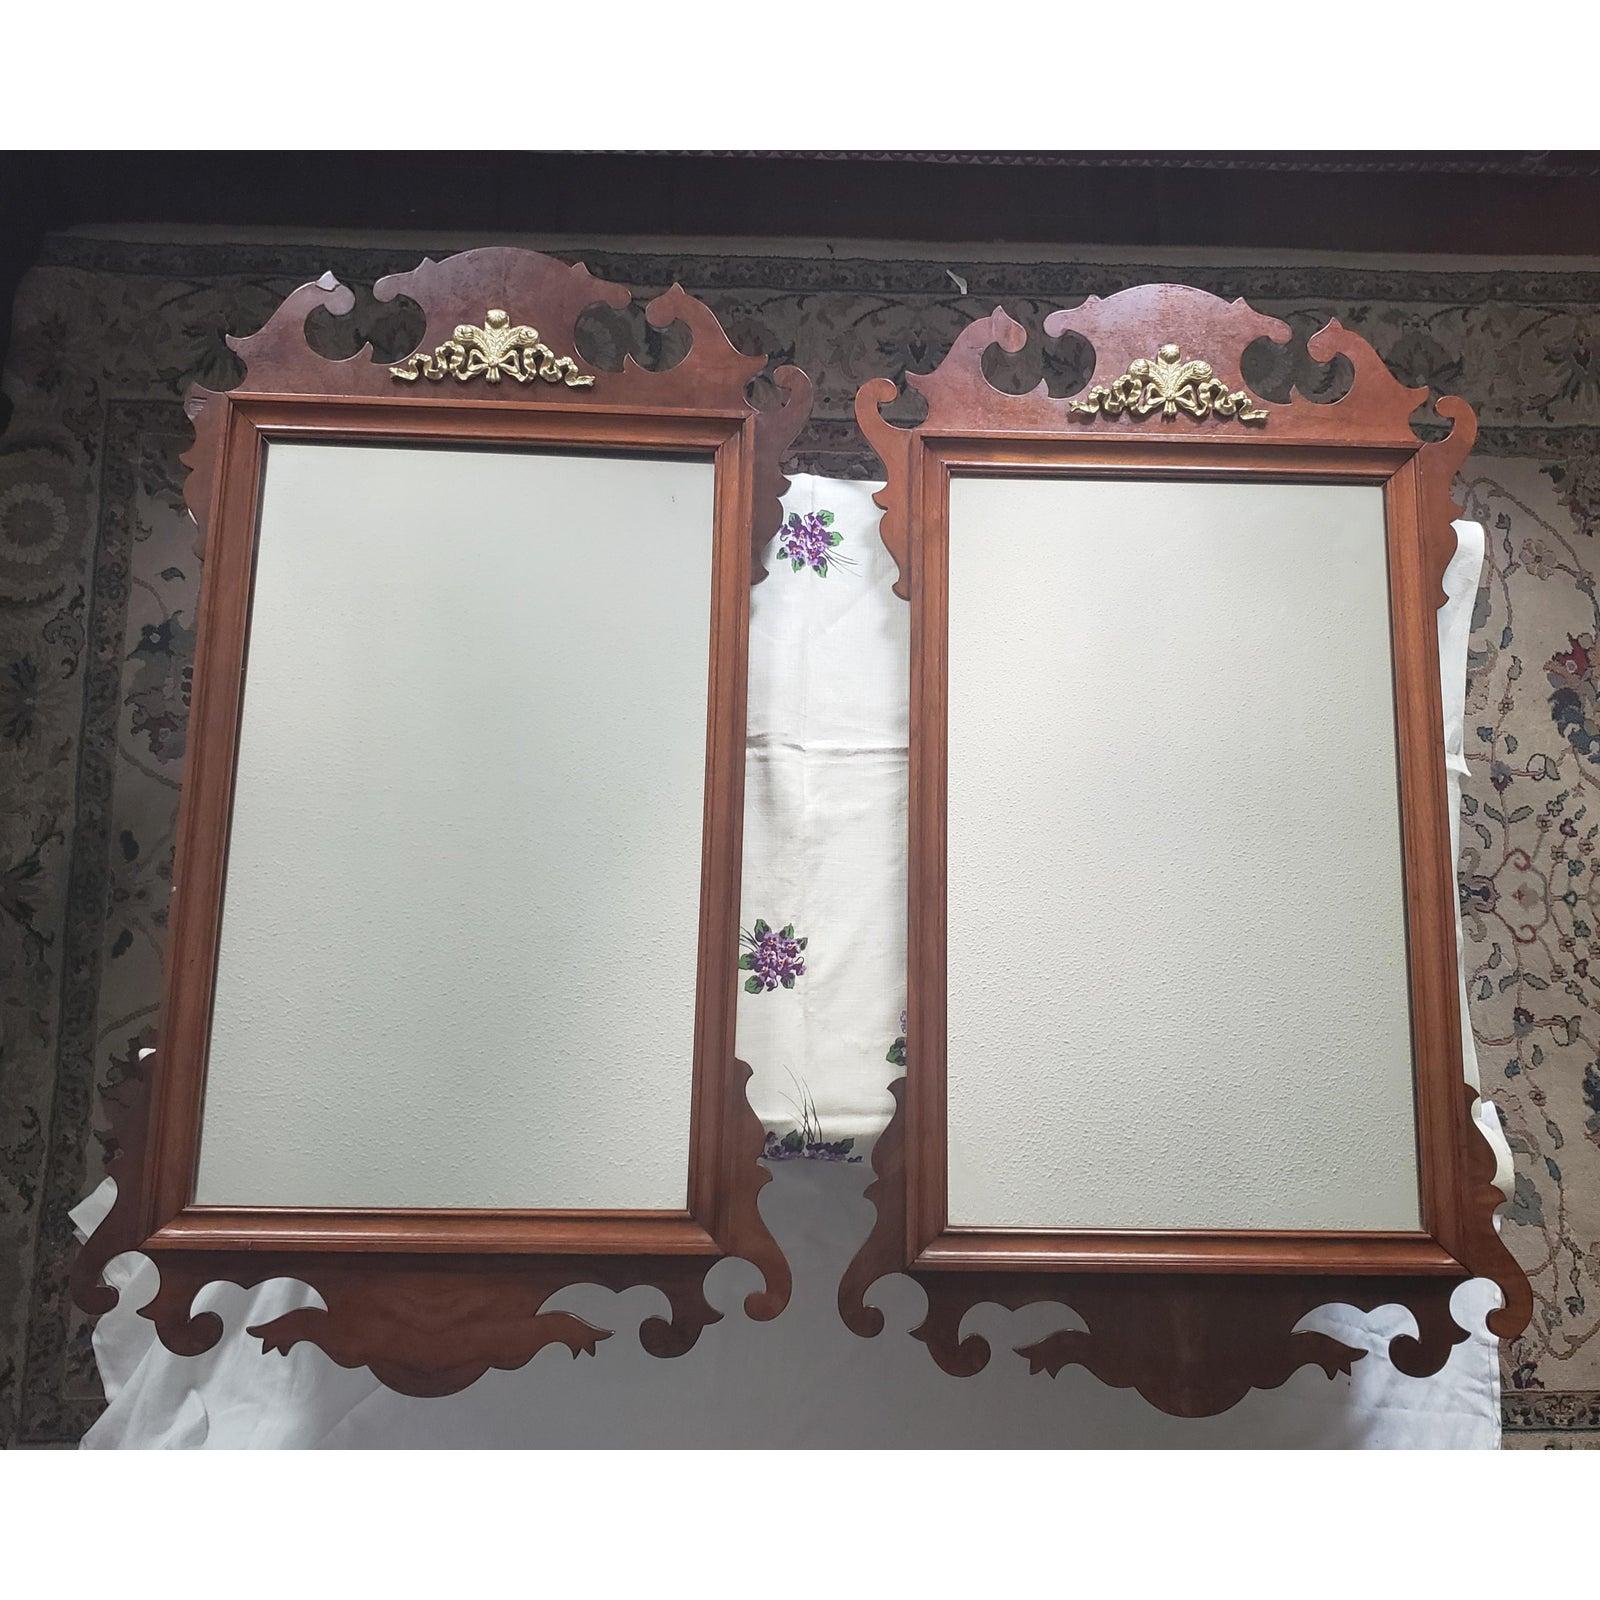 Antique solid mahogany Chippendale mirrors with solid antique brass ornate.
Measures: 23